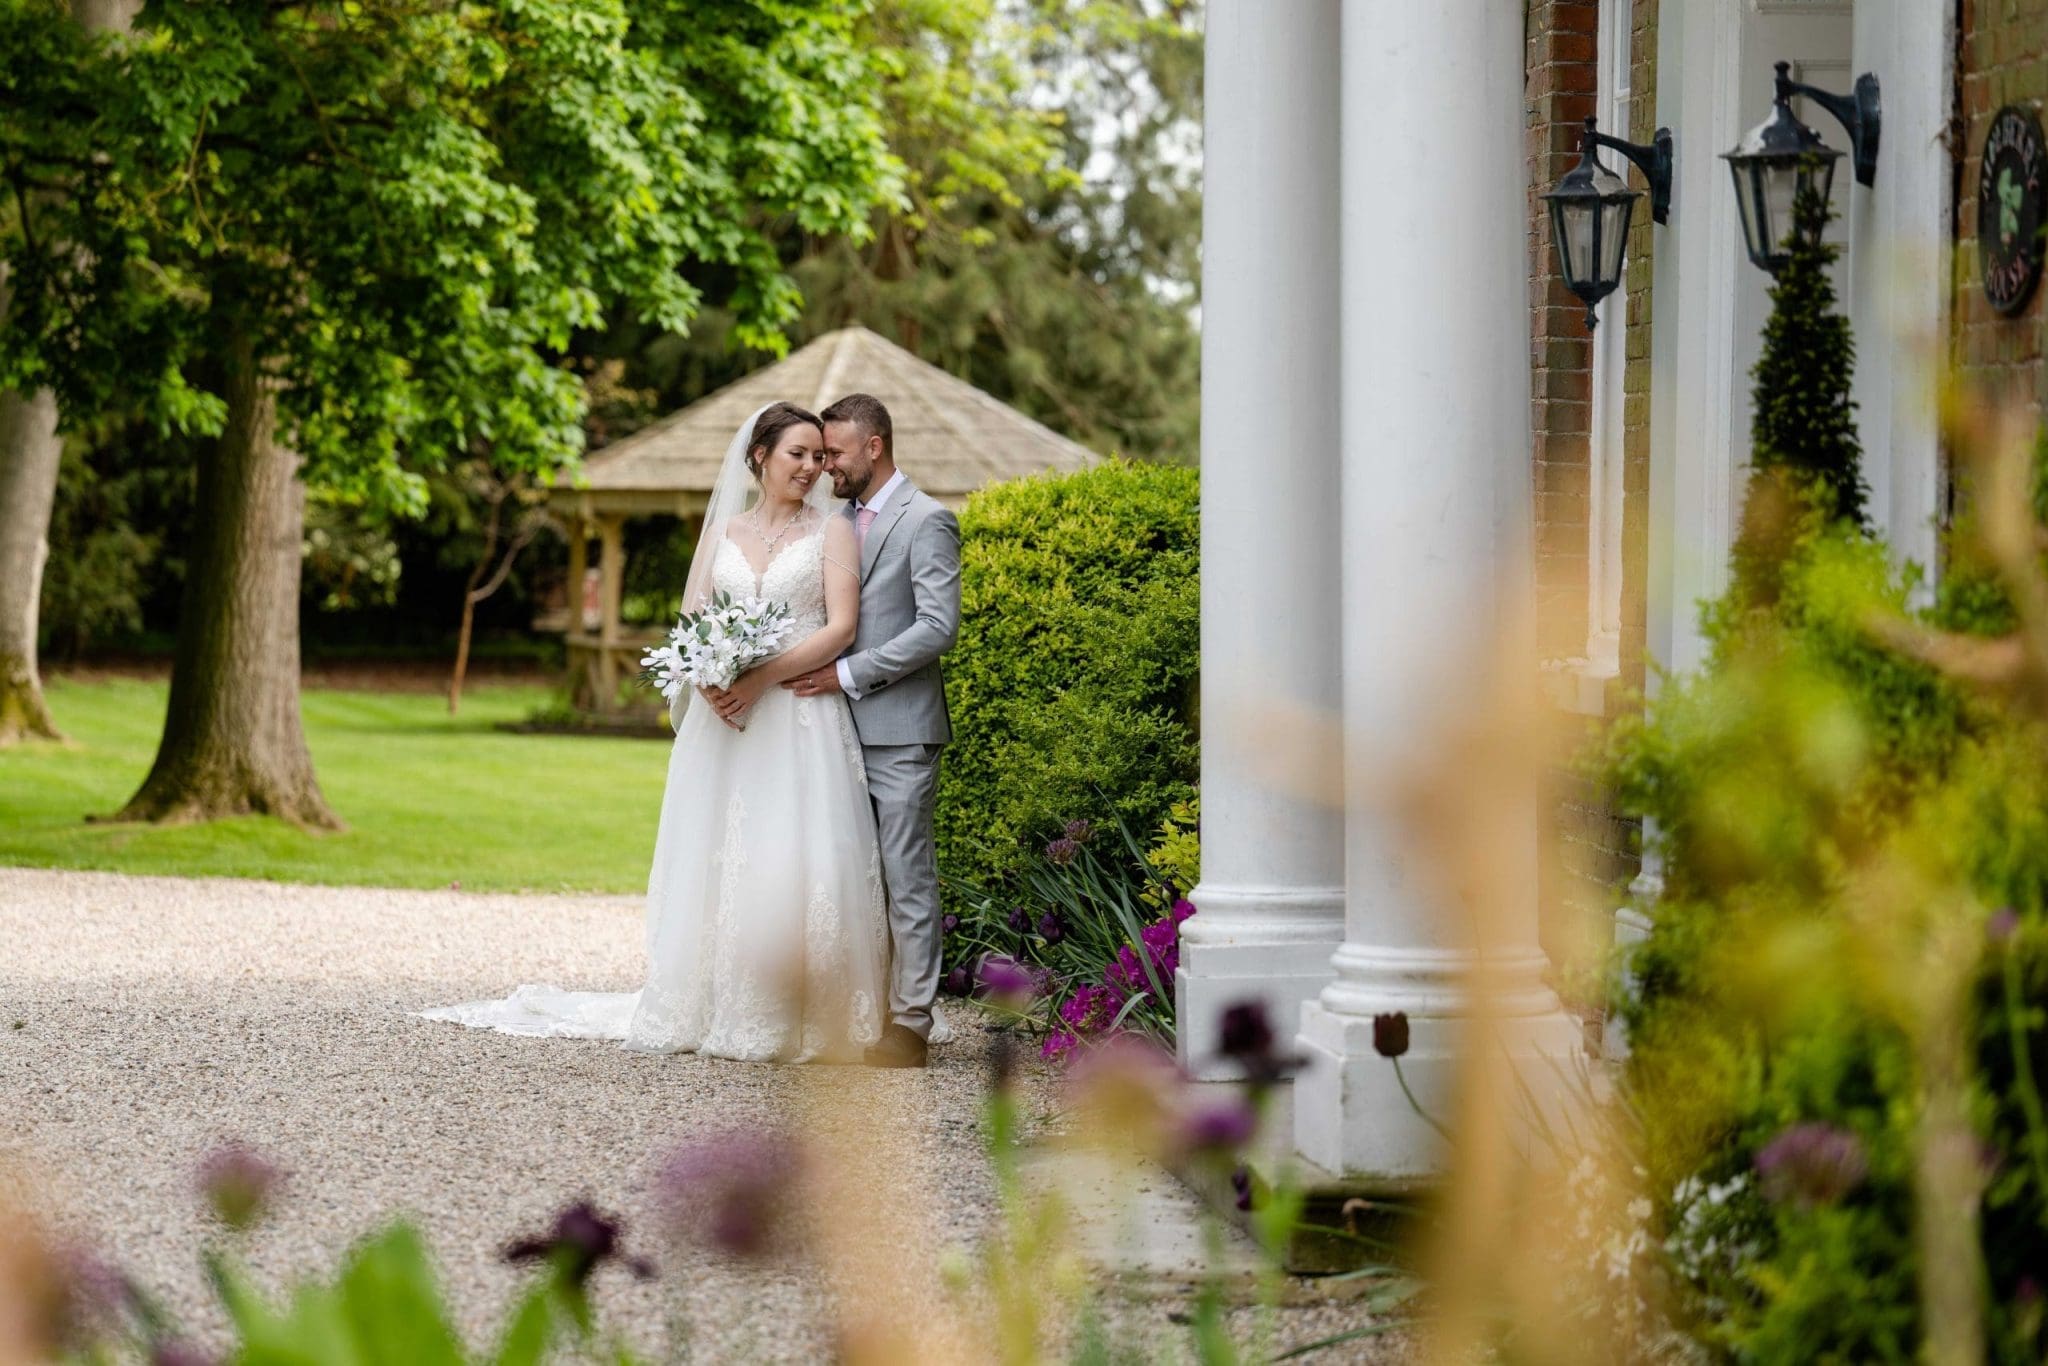 Bride & Groom image at Mulberry House